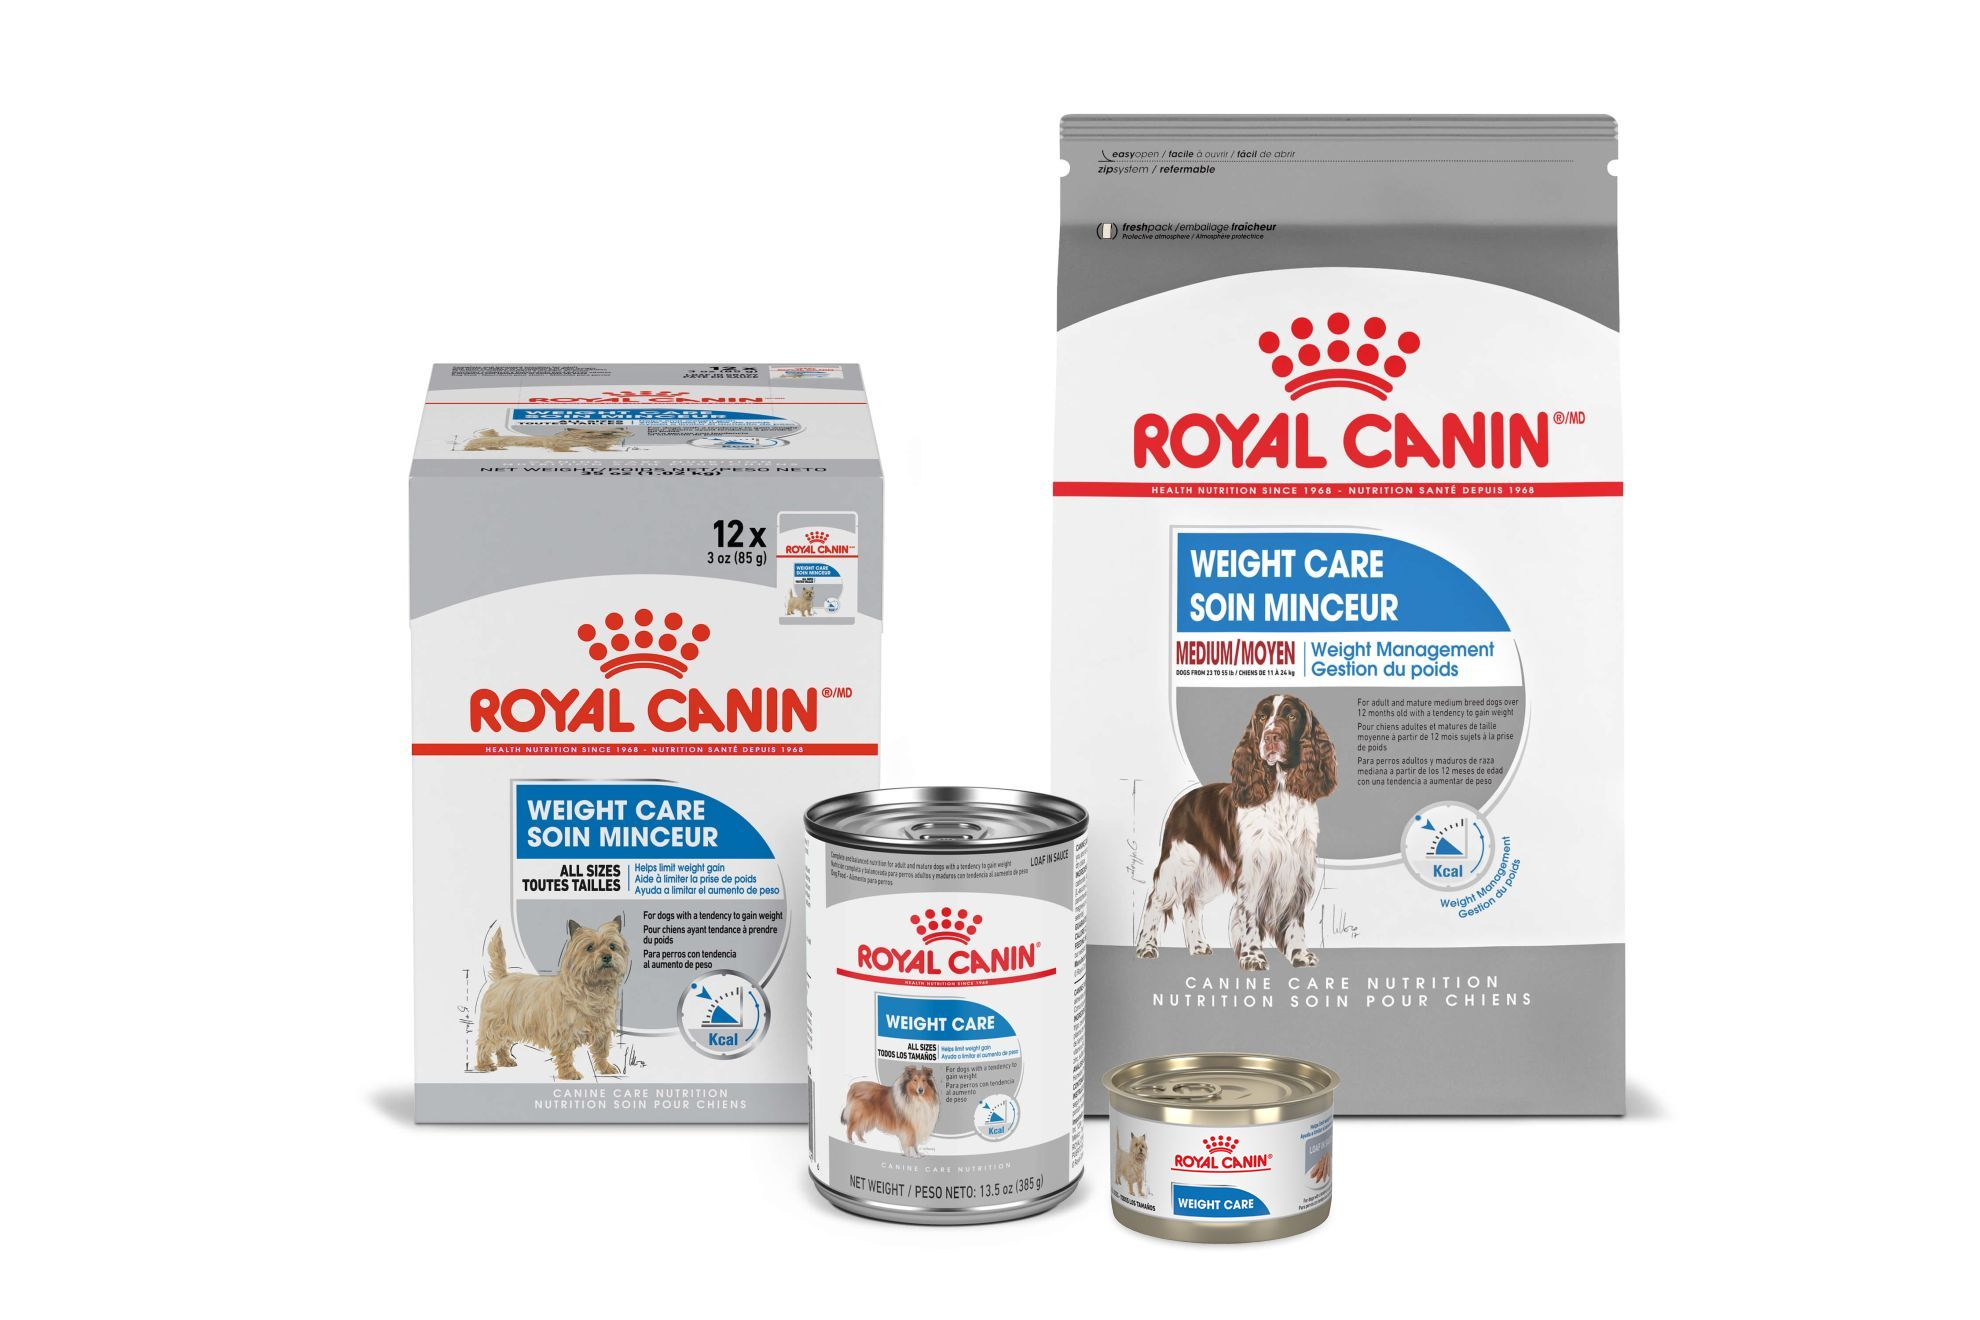 Royal Canin Weight Care Dog Food